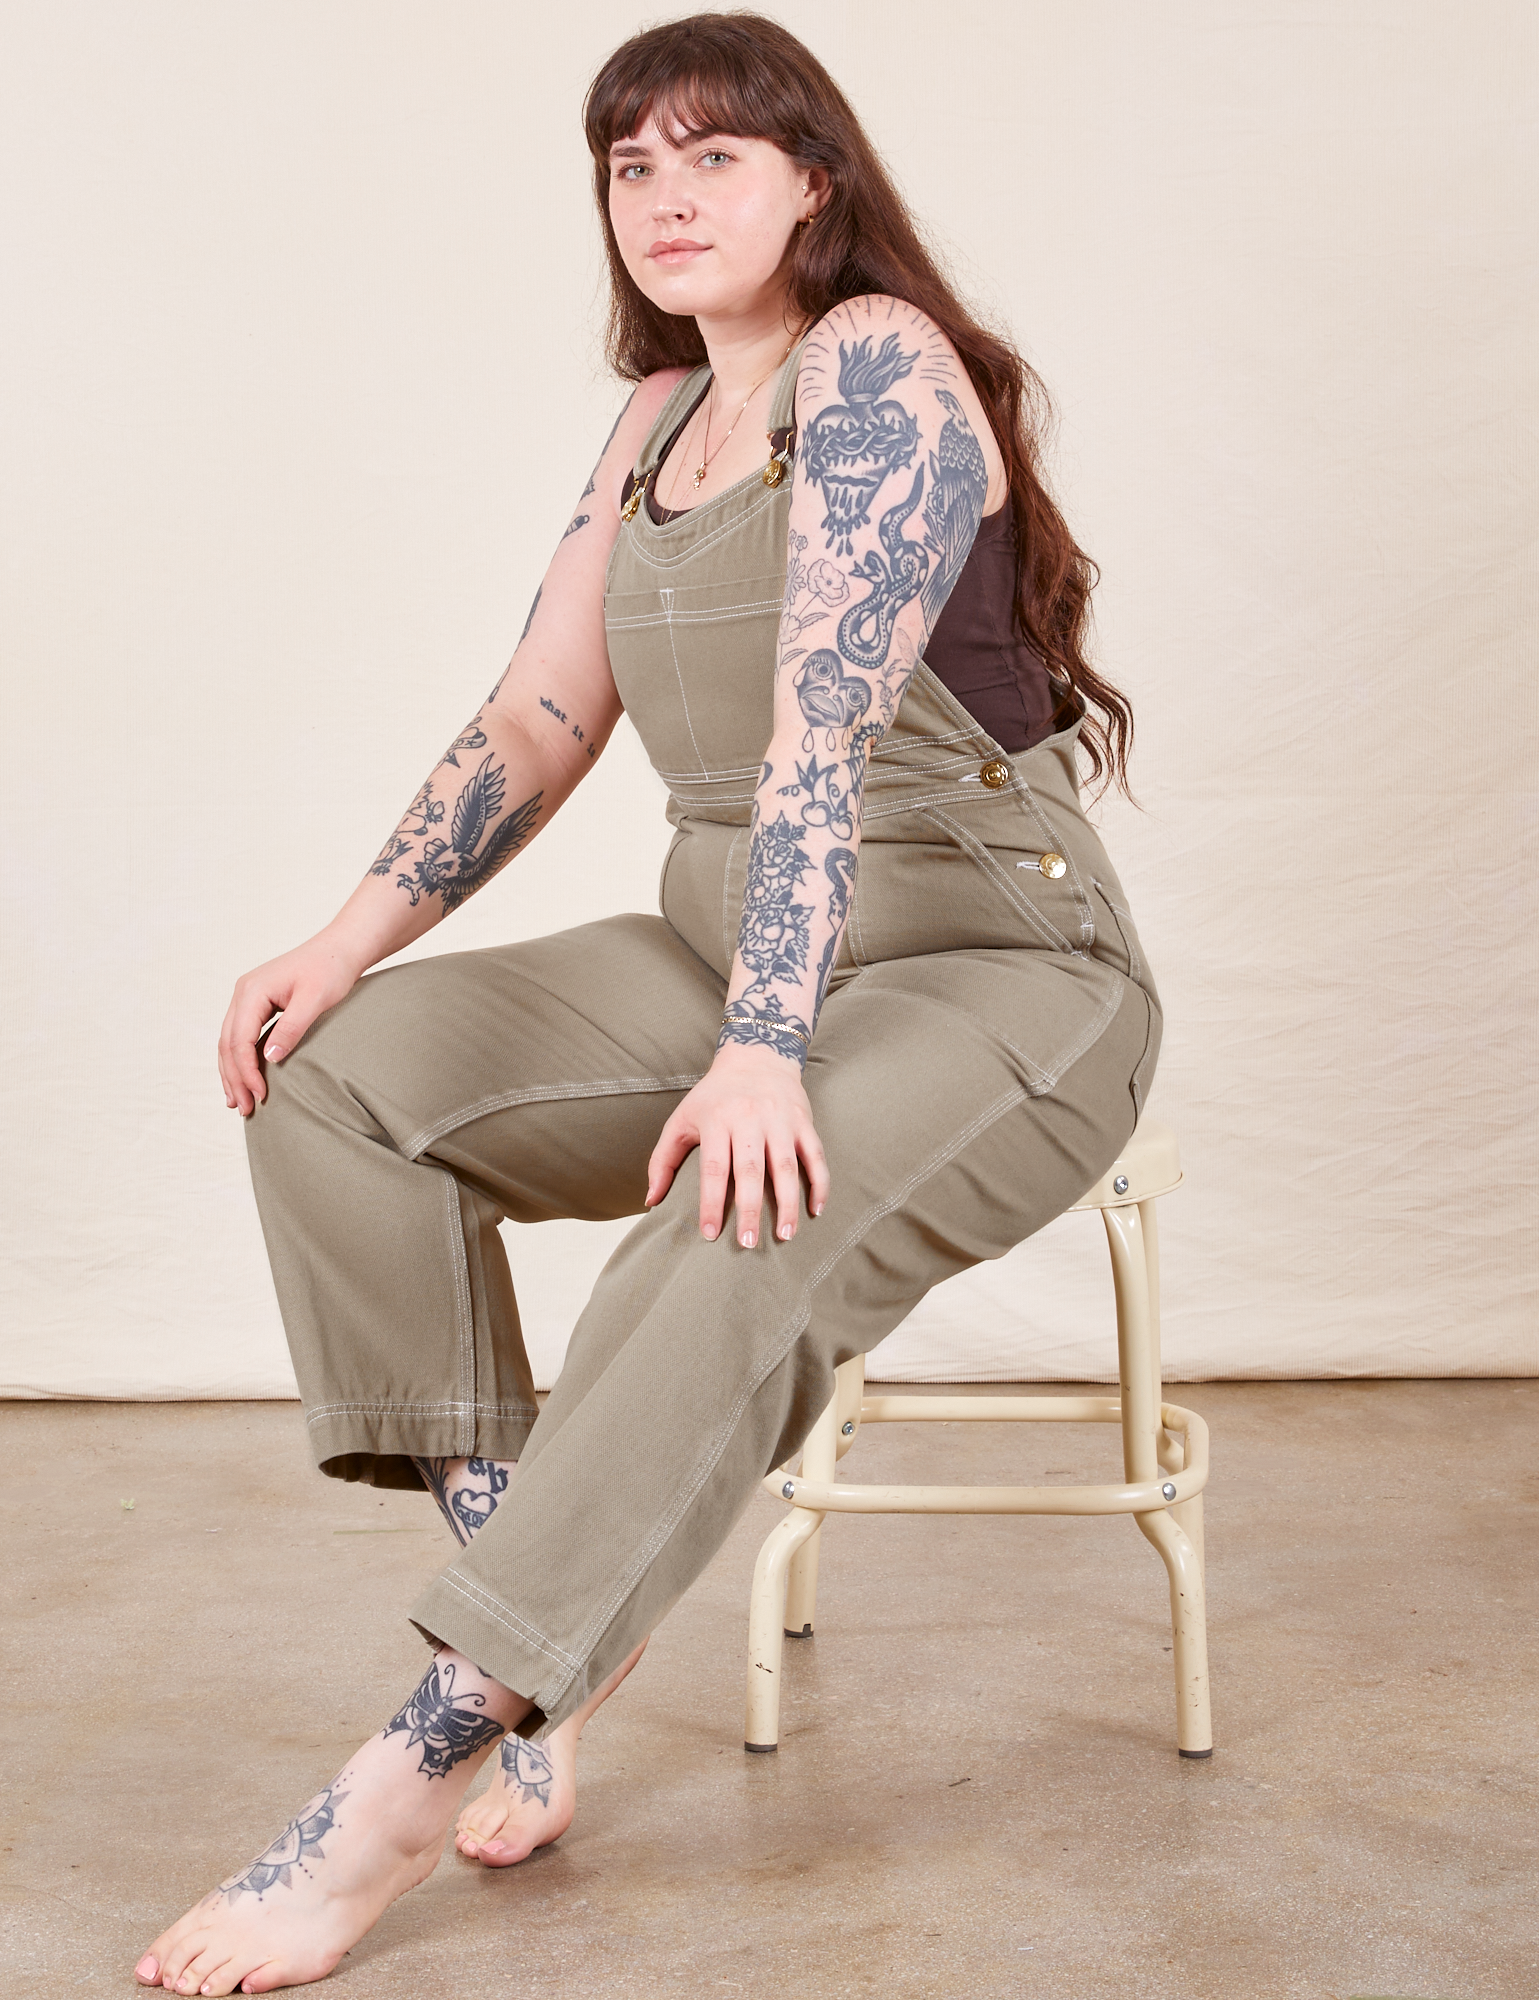 Sydney is sitting on a stool wearing Original Overalls in Khaki Grey